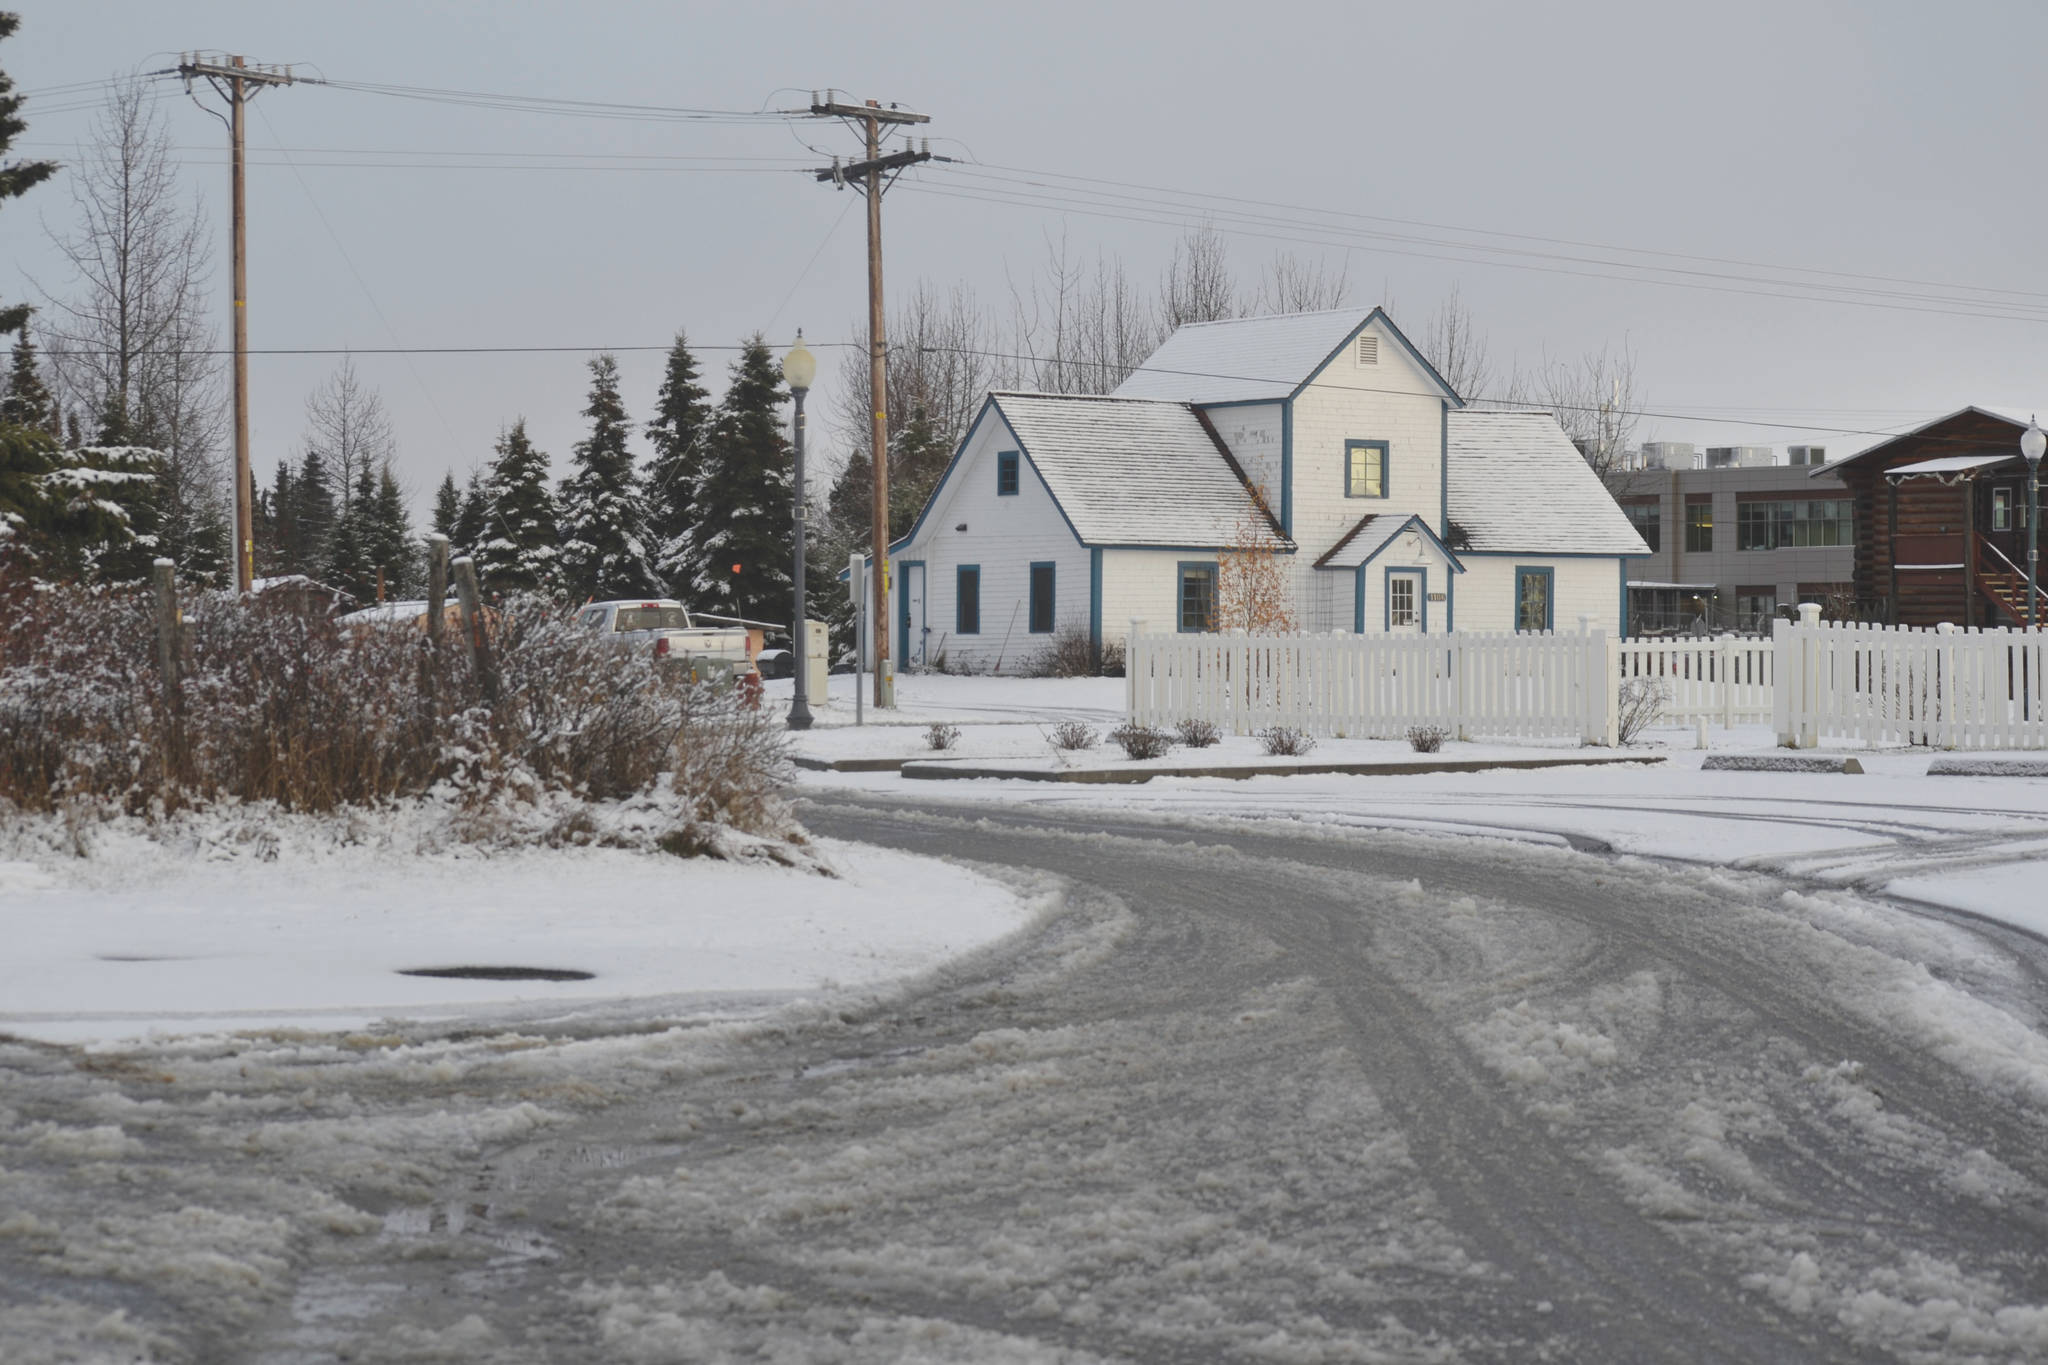 Old Town Kenai woke up to a blanket of snow Thursday morning, and by Thursday afternoon Petersen Way was slushy and wet, shown on Thursday, Nov. 14, 2019, in Kenai, Alaska. (Photo by Victoria Petersen/Peninsula Clarion)